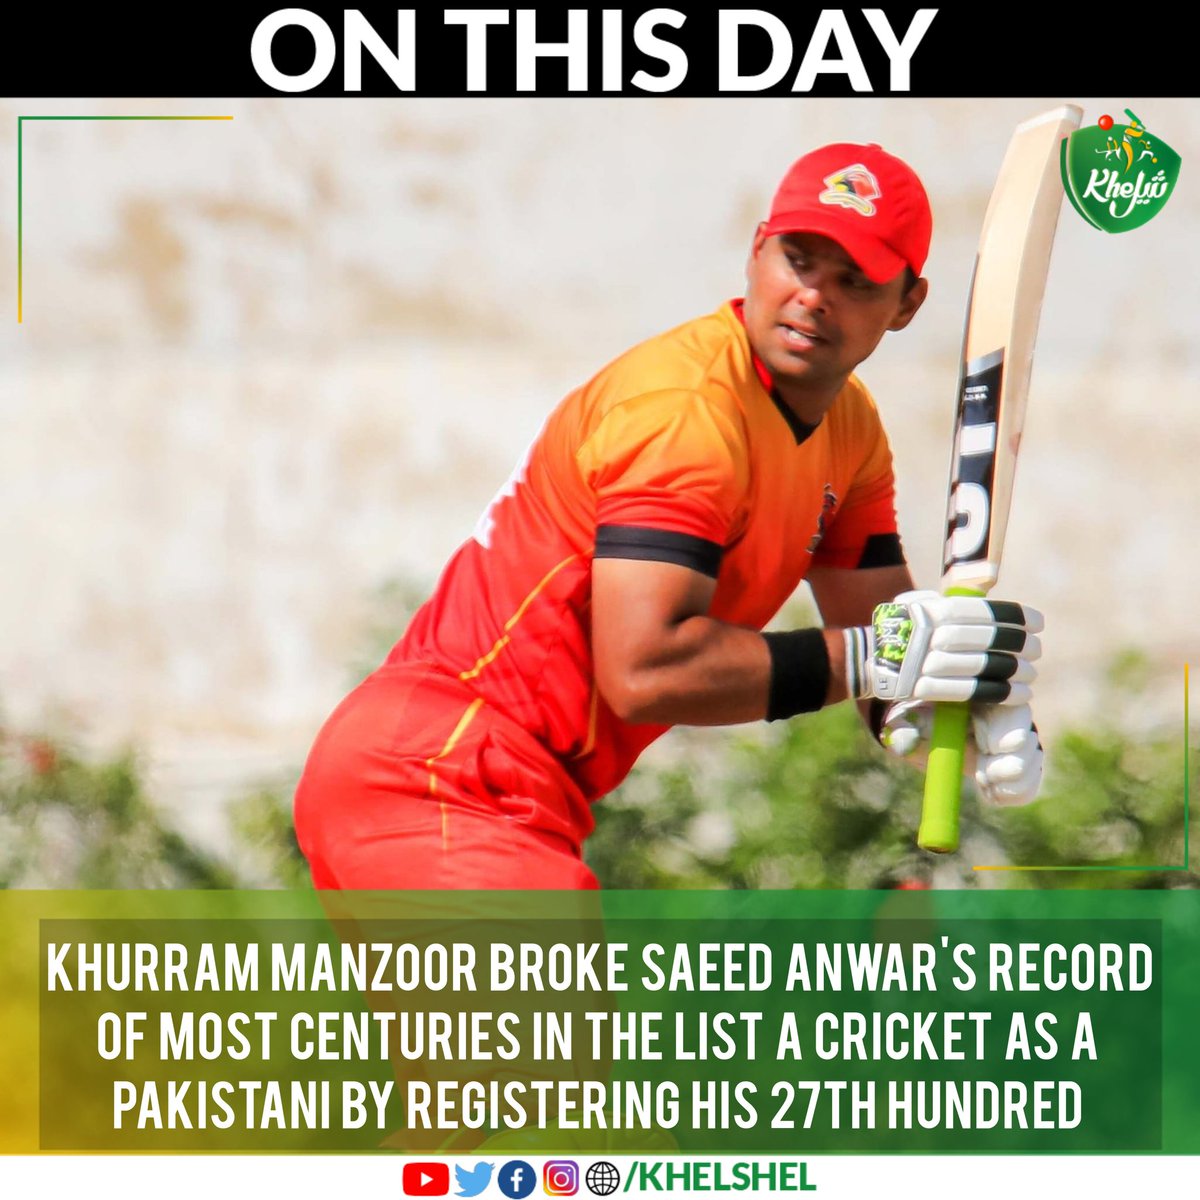 #OnThisDay in 2021, Khurram Manzoor created history as a Pakistani and became the batsman to score most hundred breaking Saeed Anwar's record. #Cricket | #Pakistan | #KhurramManzoor | #PakistanCup | #Karachi | #Sindh